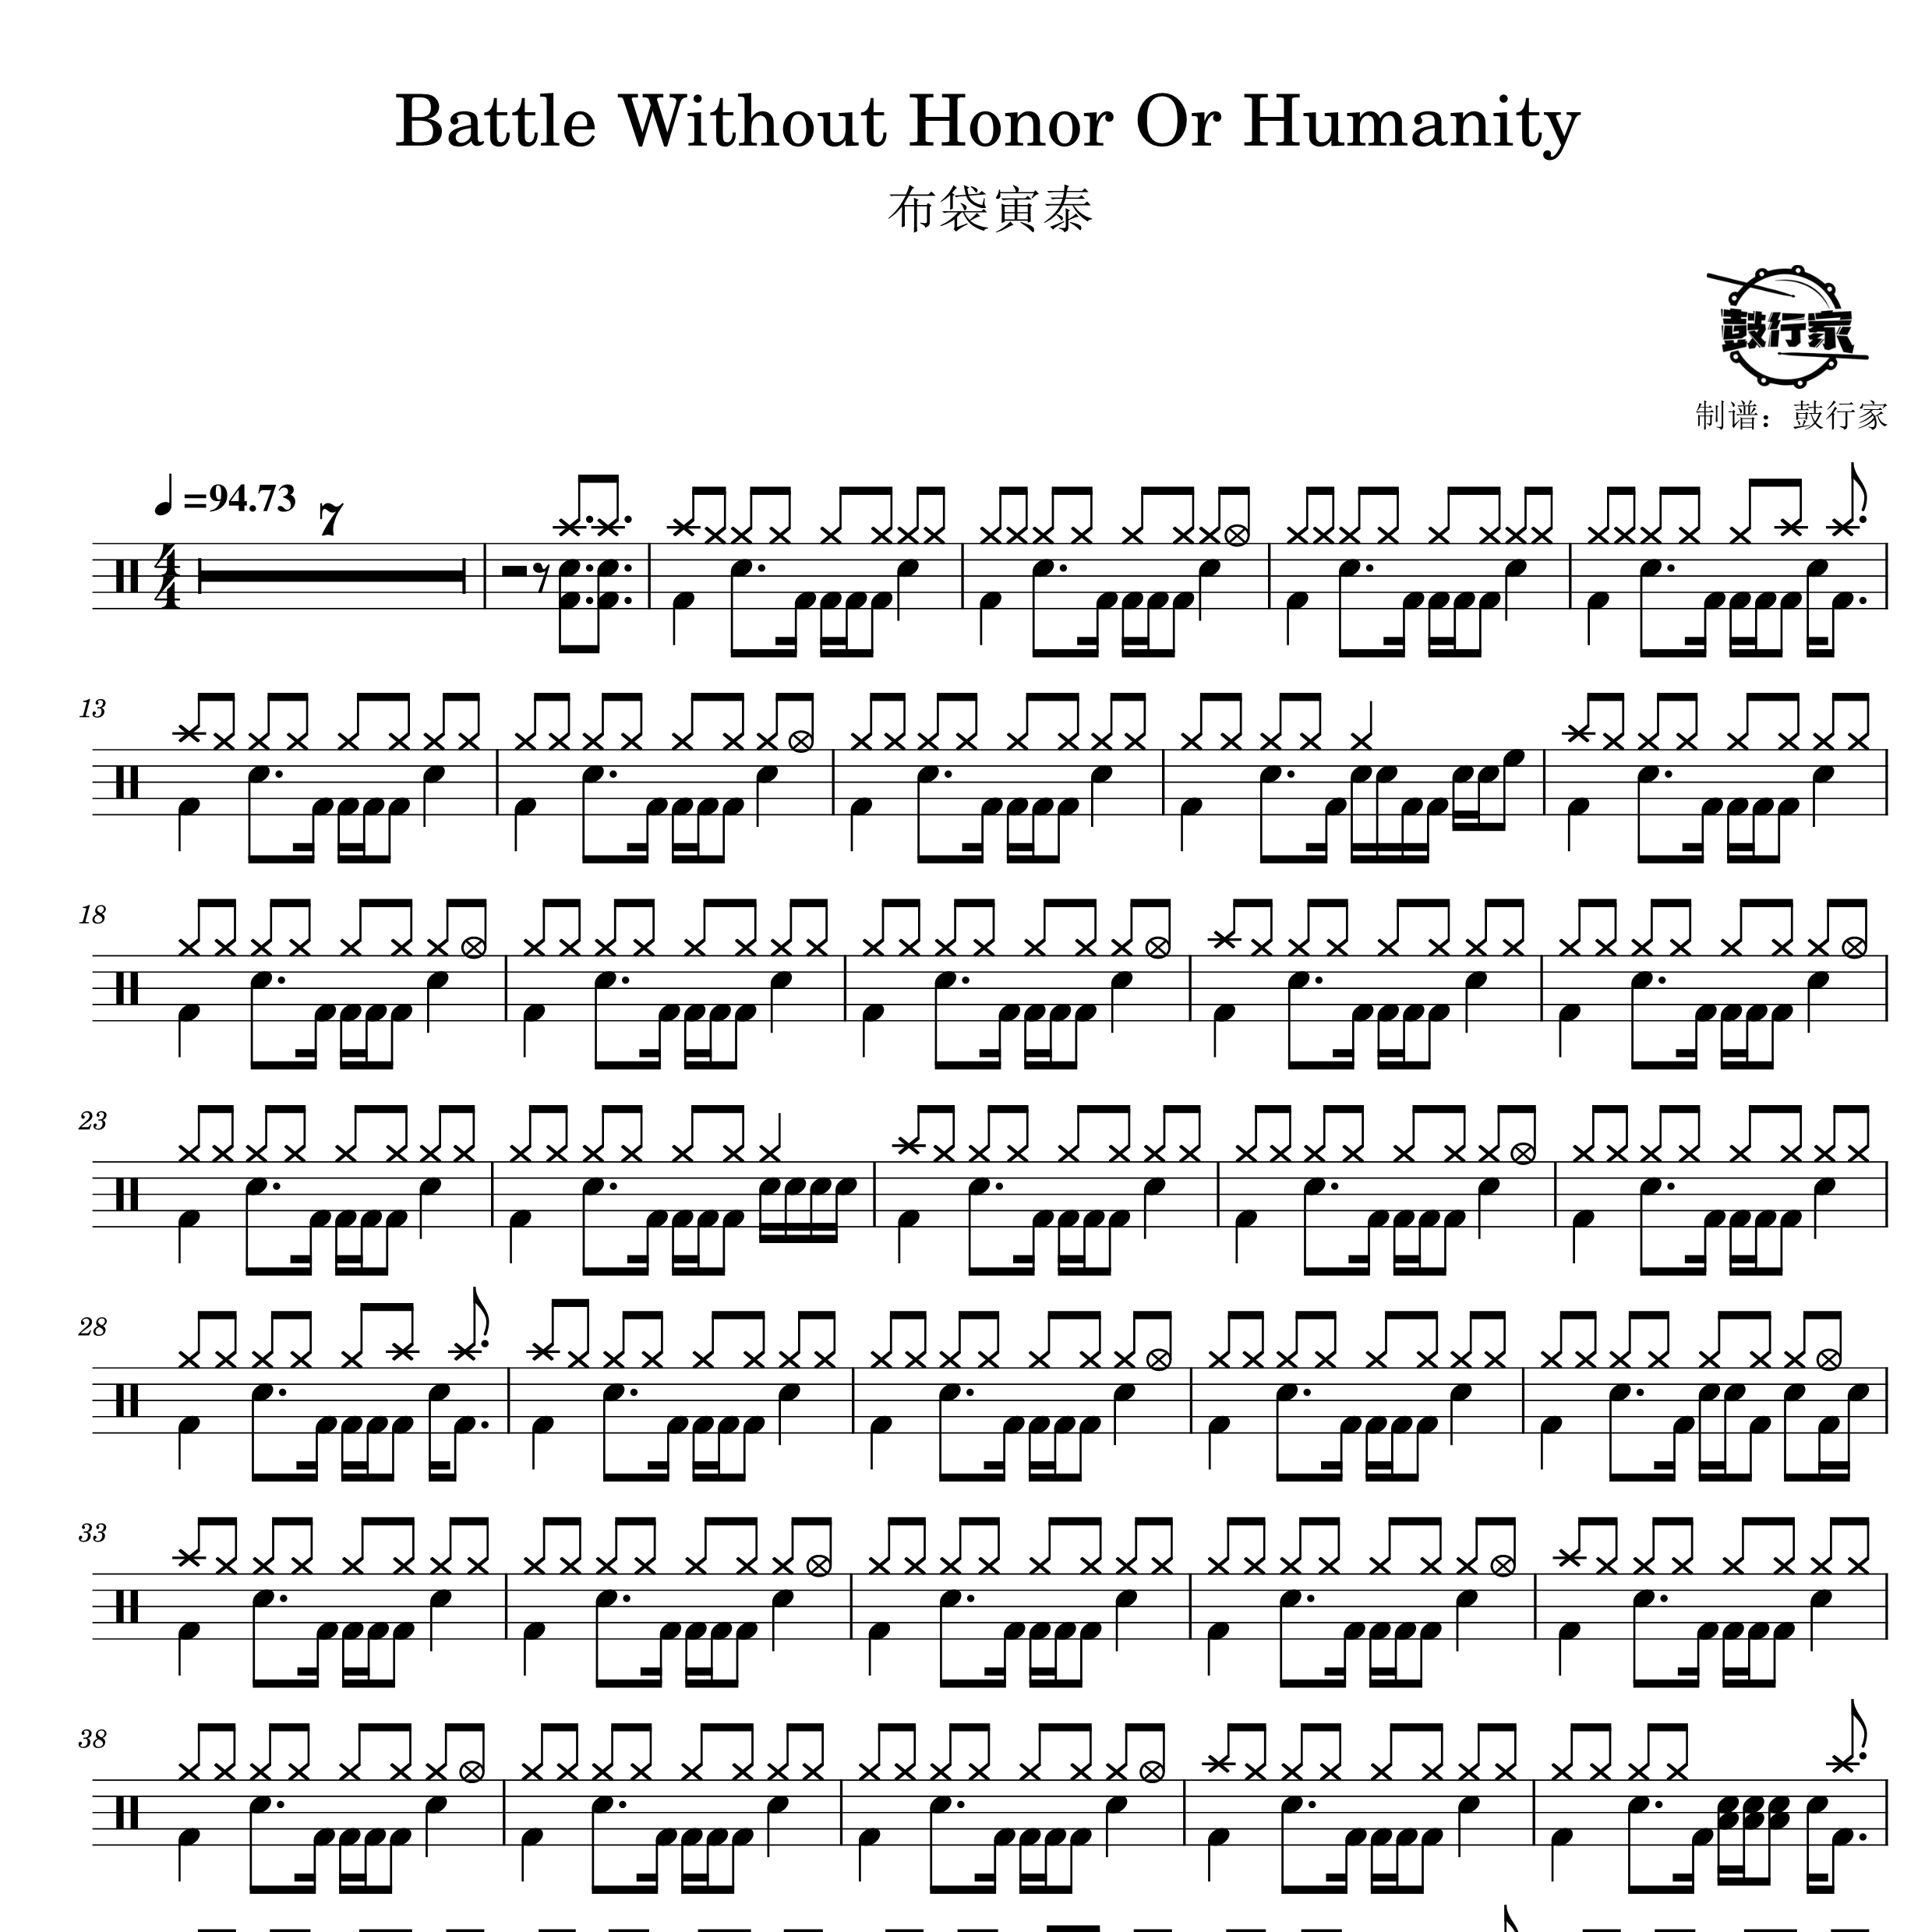 Battle Without Honor Or Humanity架子鼓谱